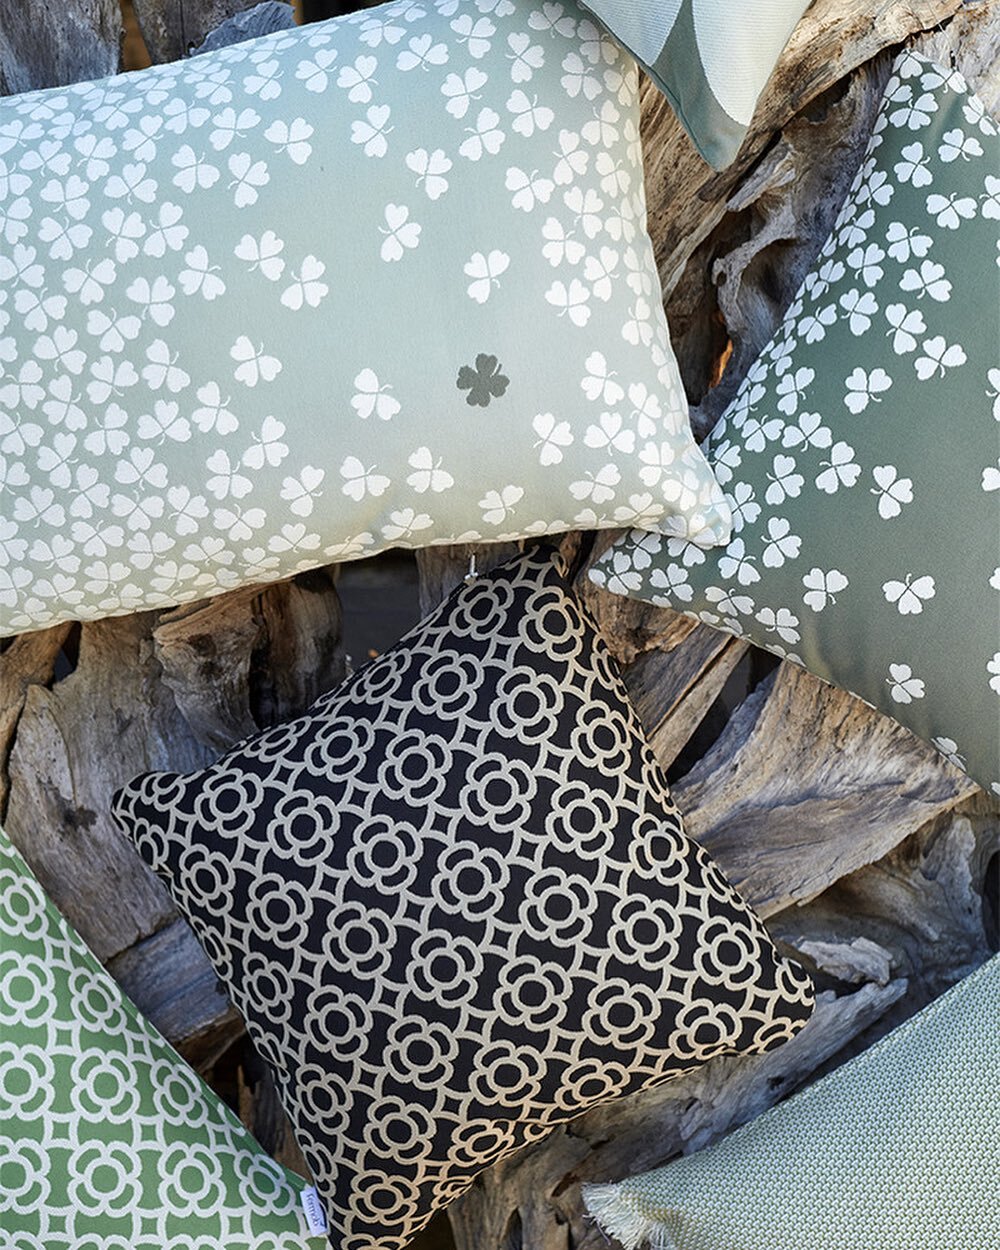 Celebrating spring greens today with these gorgeous @fermobusa pillows!  Green is trending and we have many lovely accent pillows to freshen up your outdoor space! 🍀